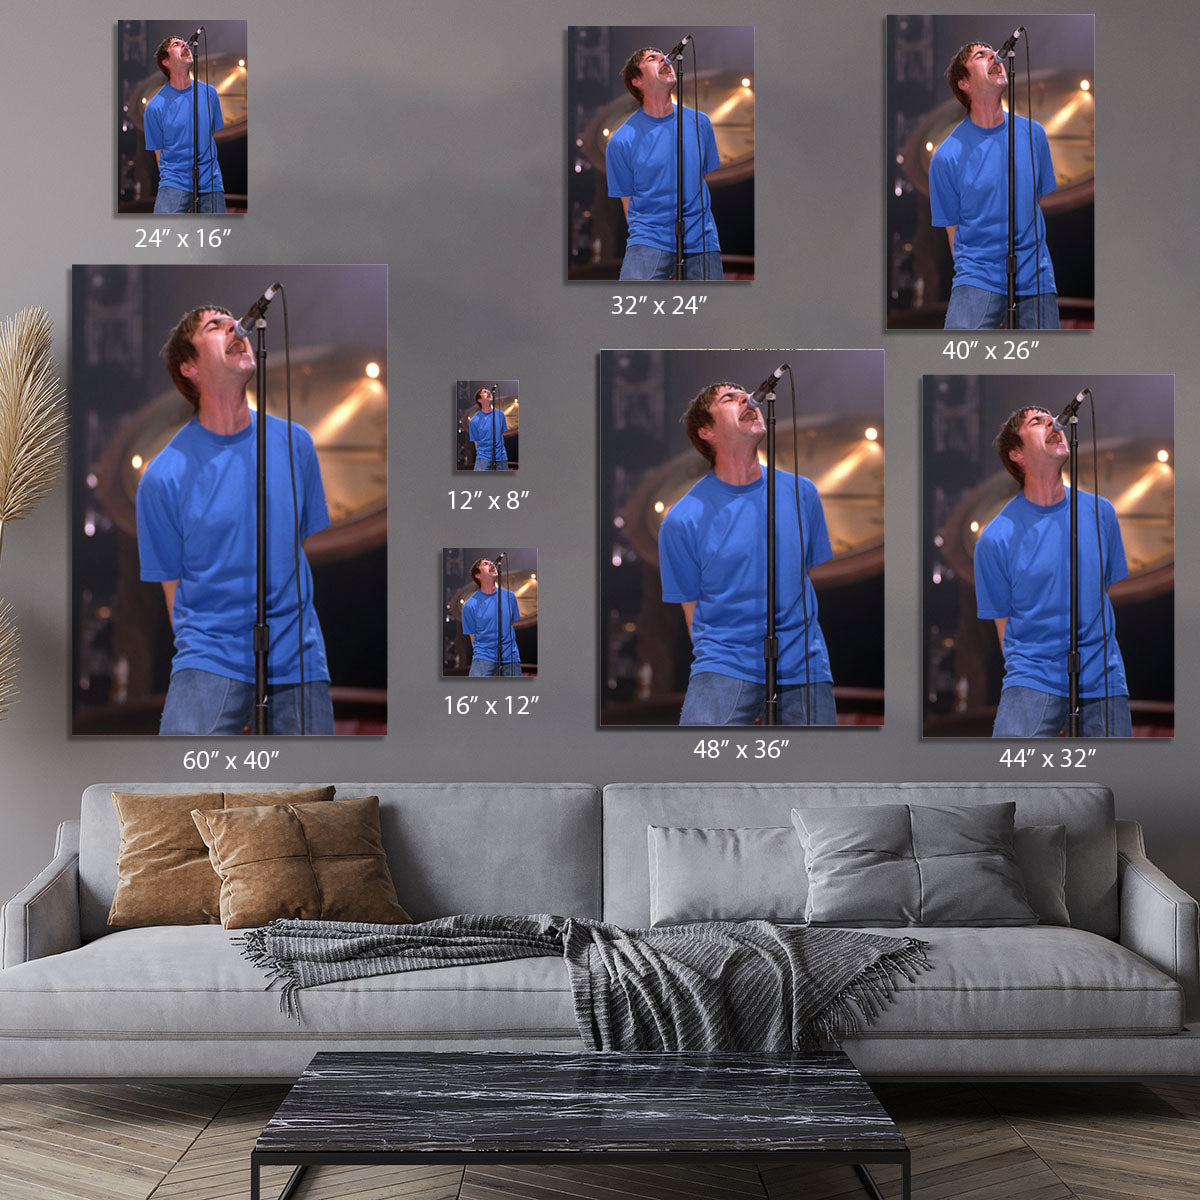 Liam Gallagher singing Canvas Print or Poster